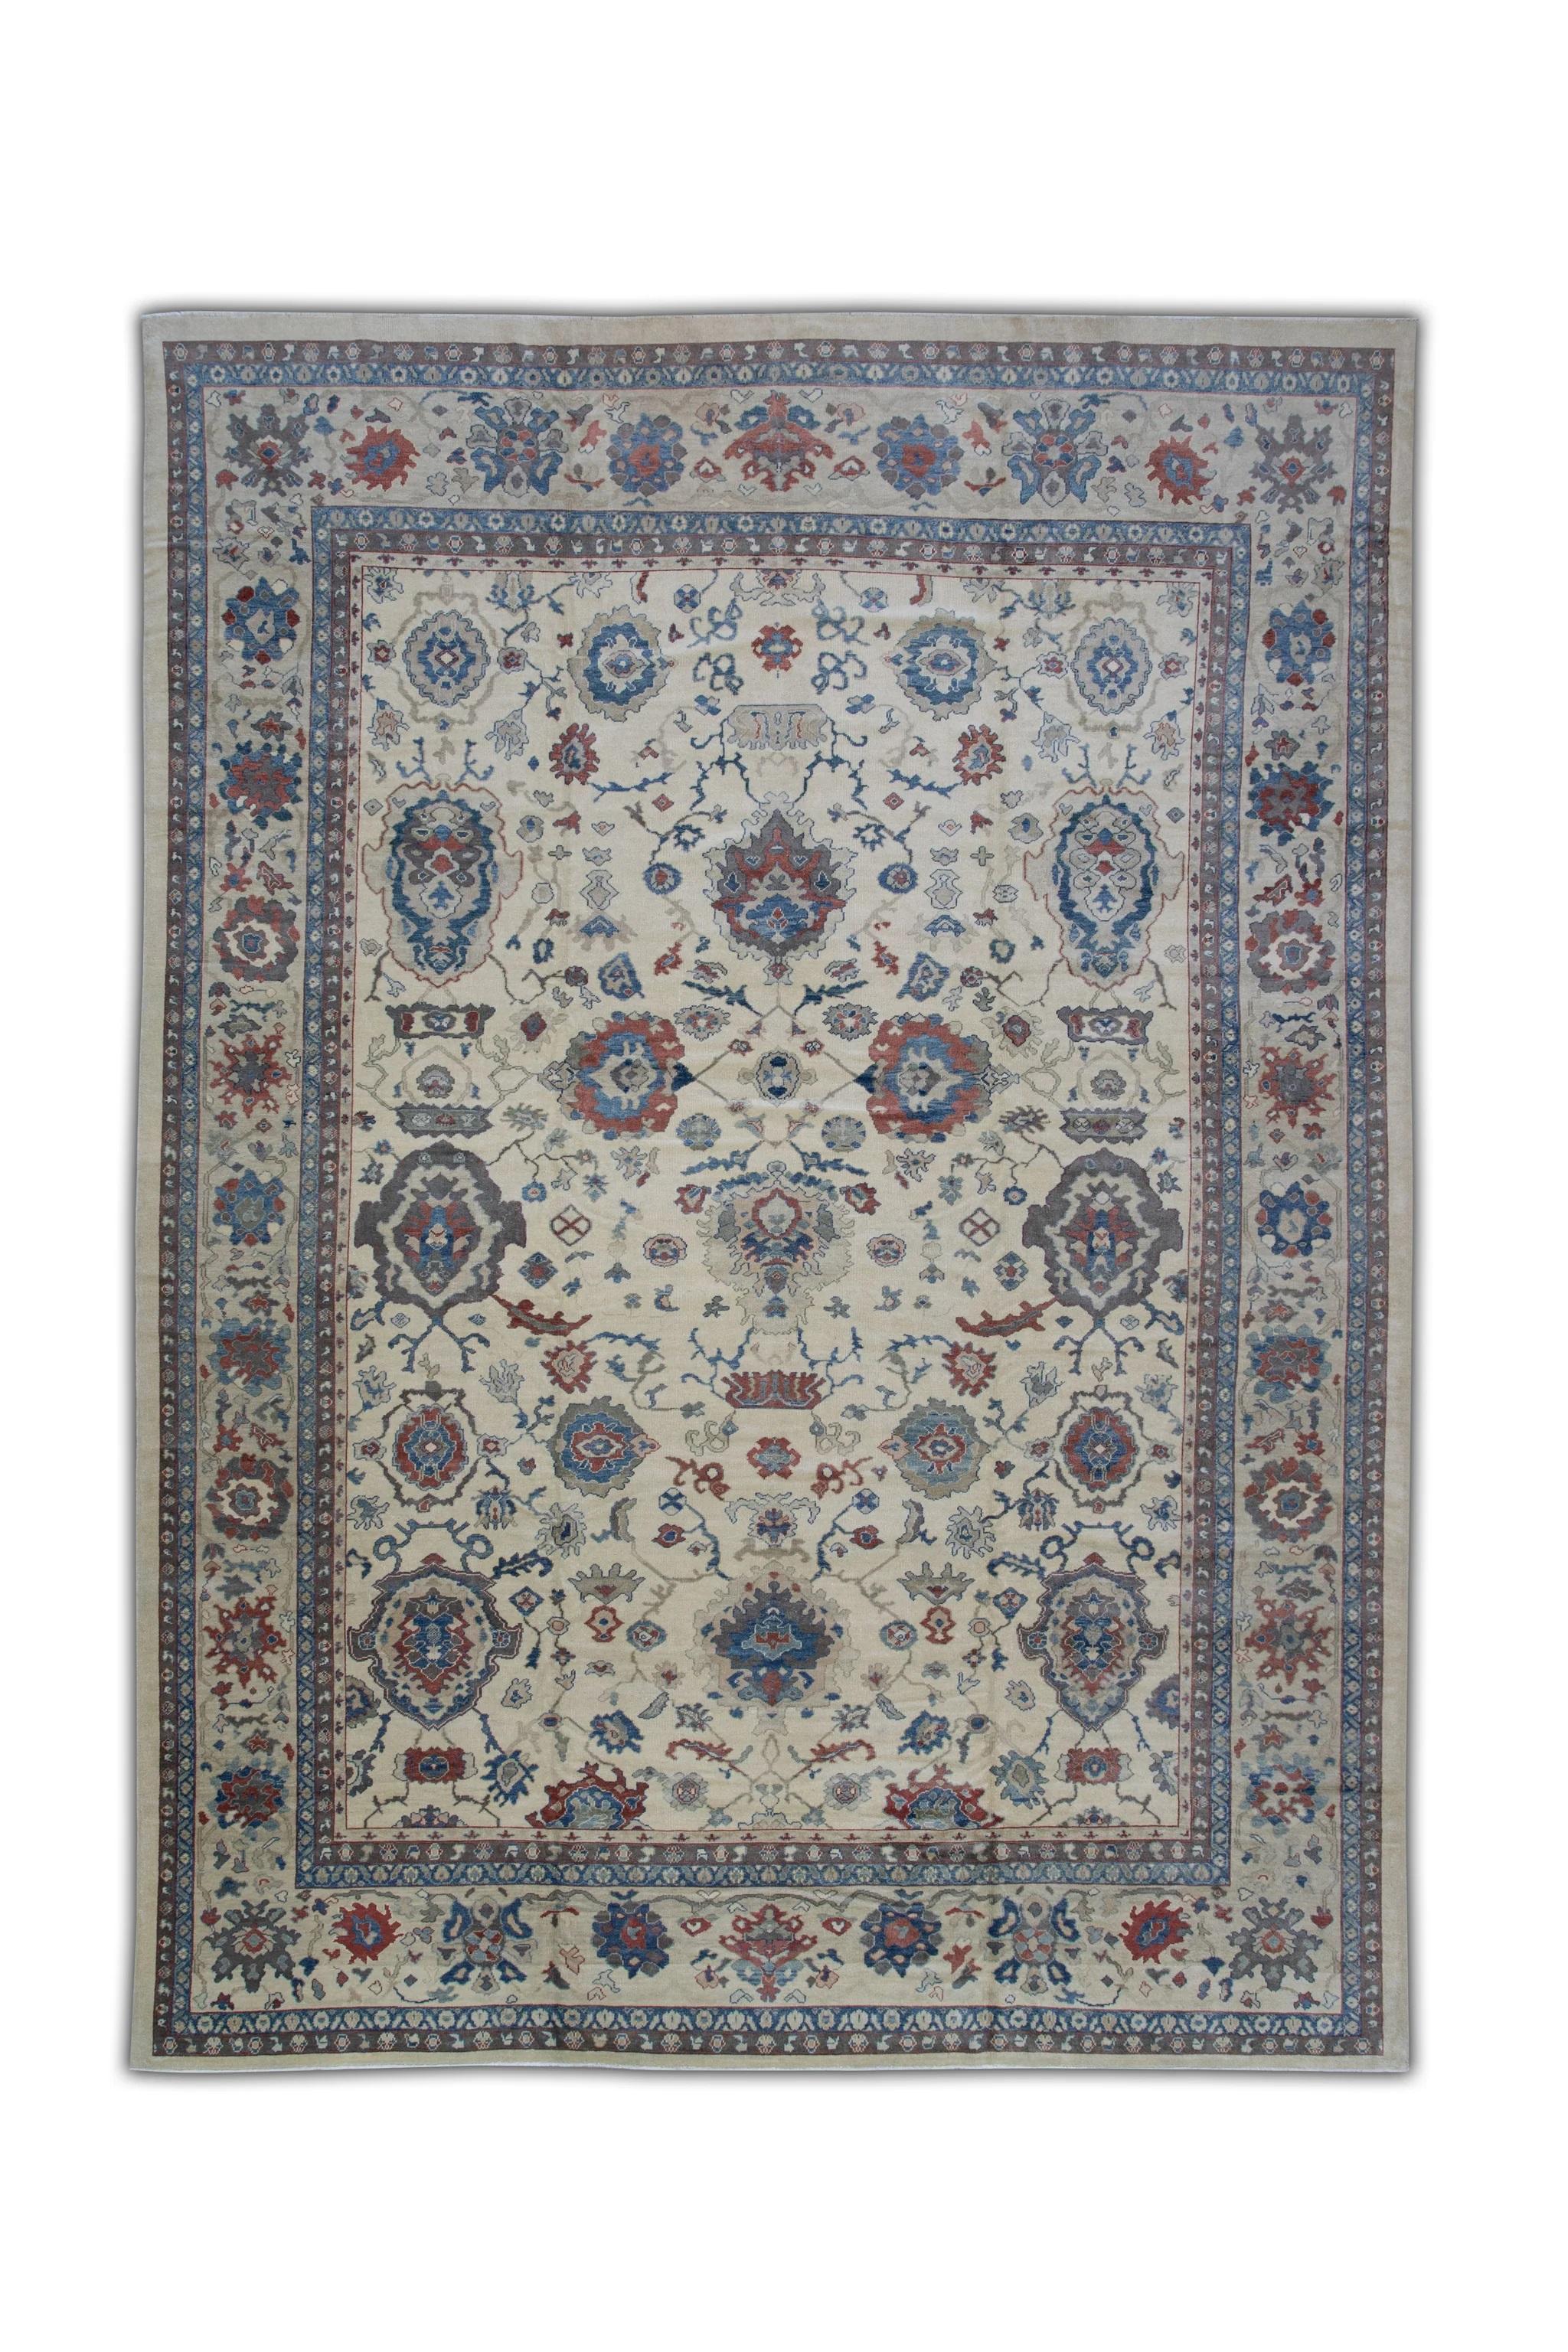 Contemporary Red & Blue Floral Design Turkish Finewoven Wool Oushak Rug 11'8